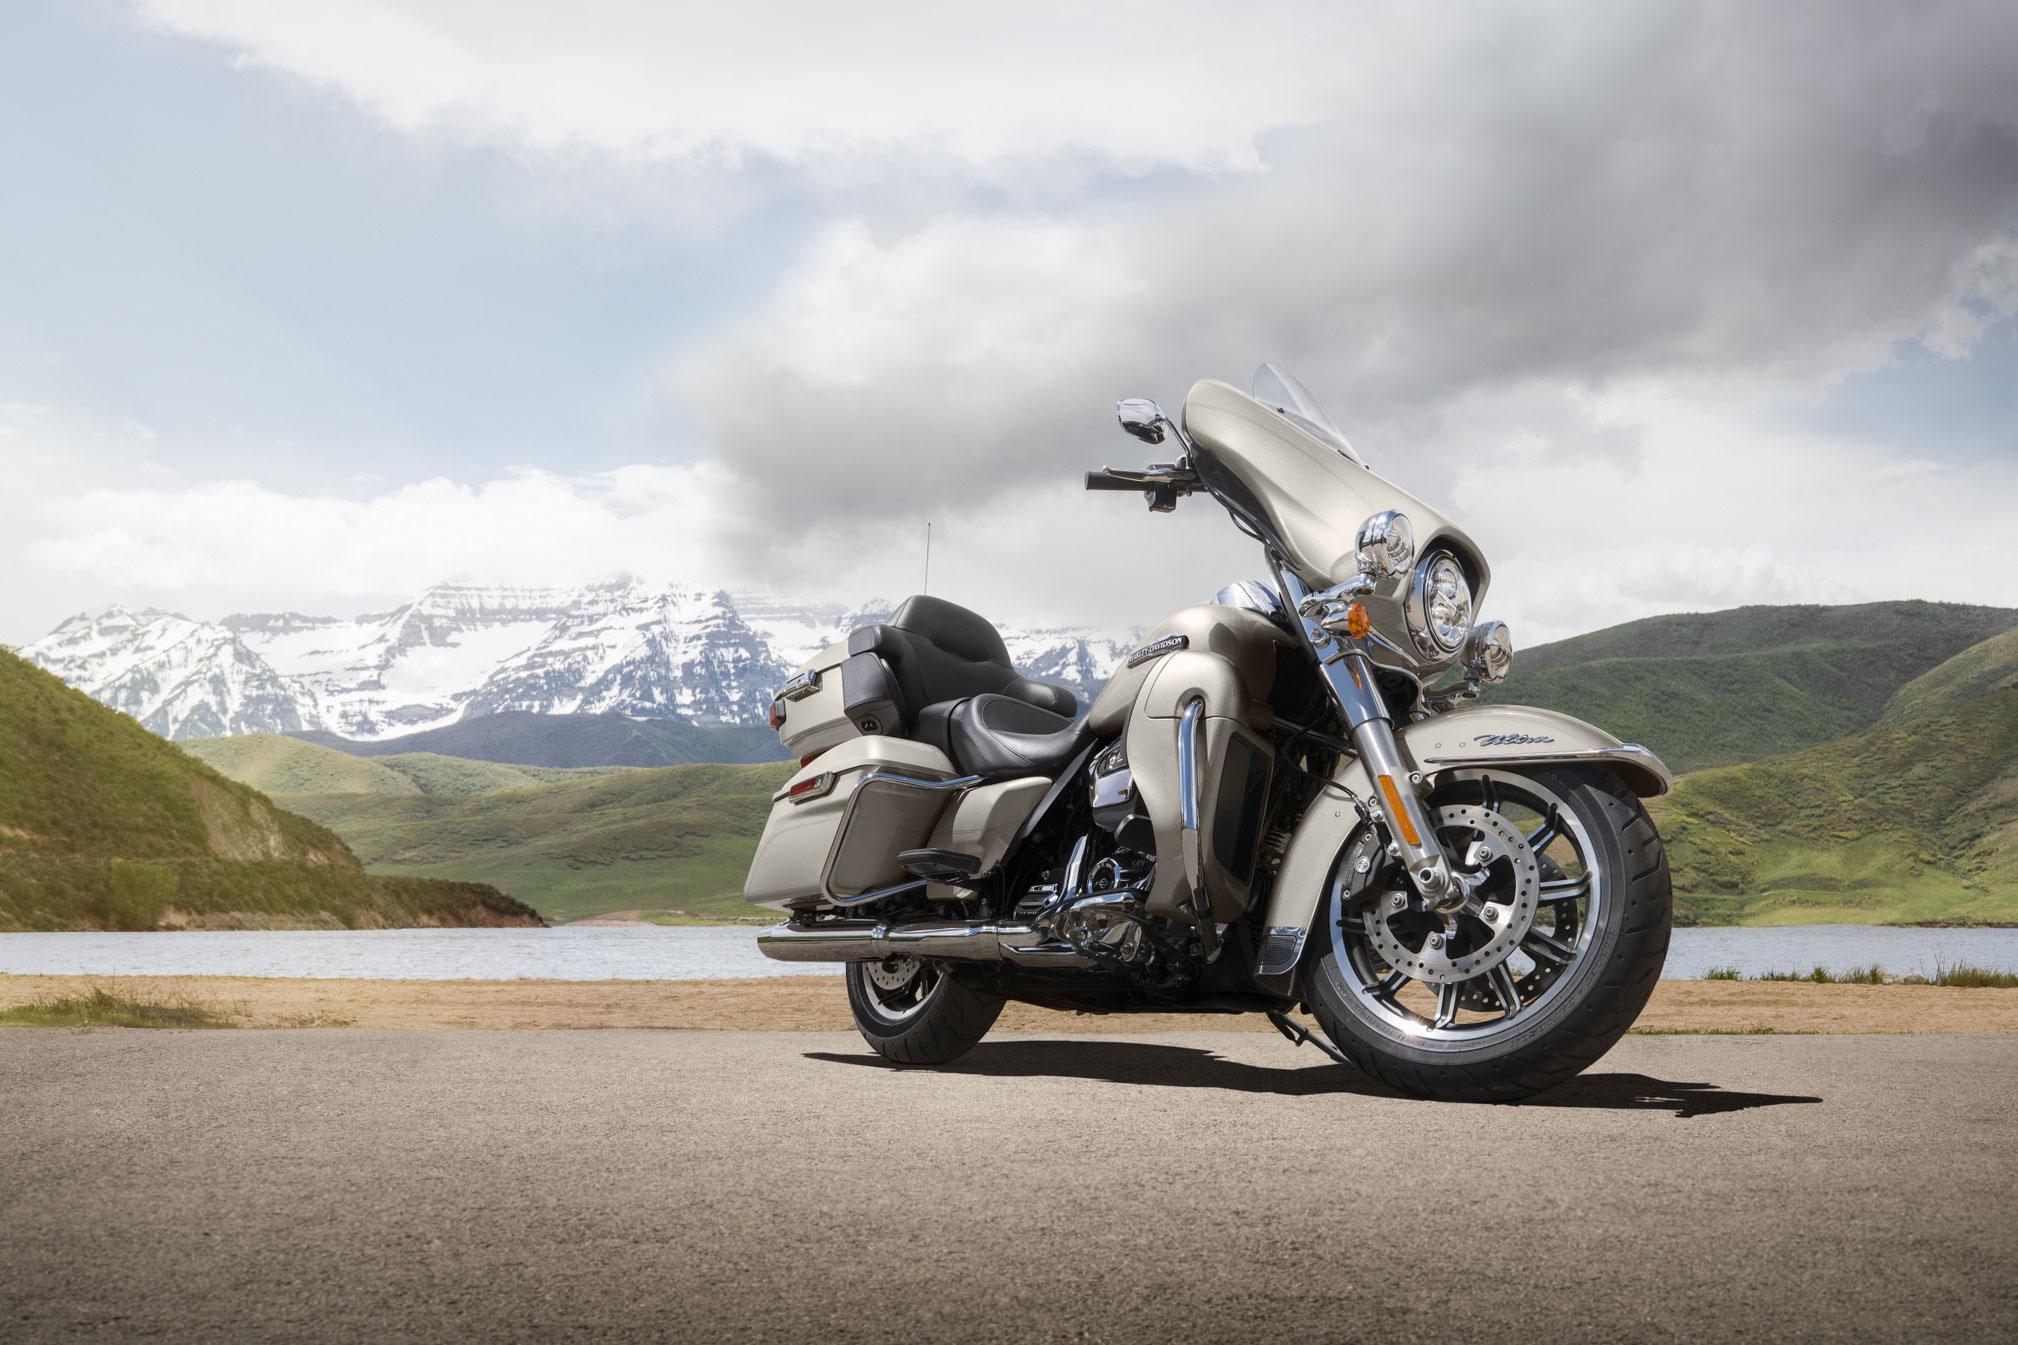 2018 HarleyDavidson Electra Glide Ultra Classic Review